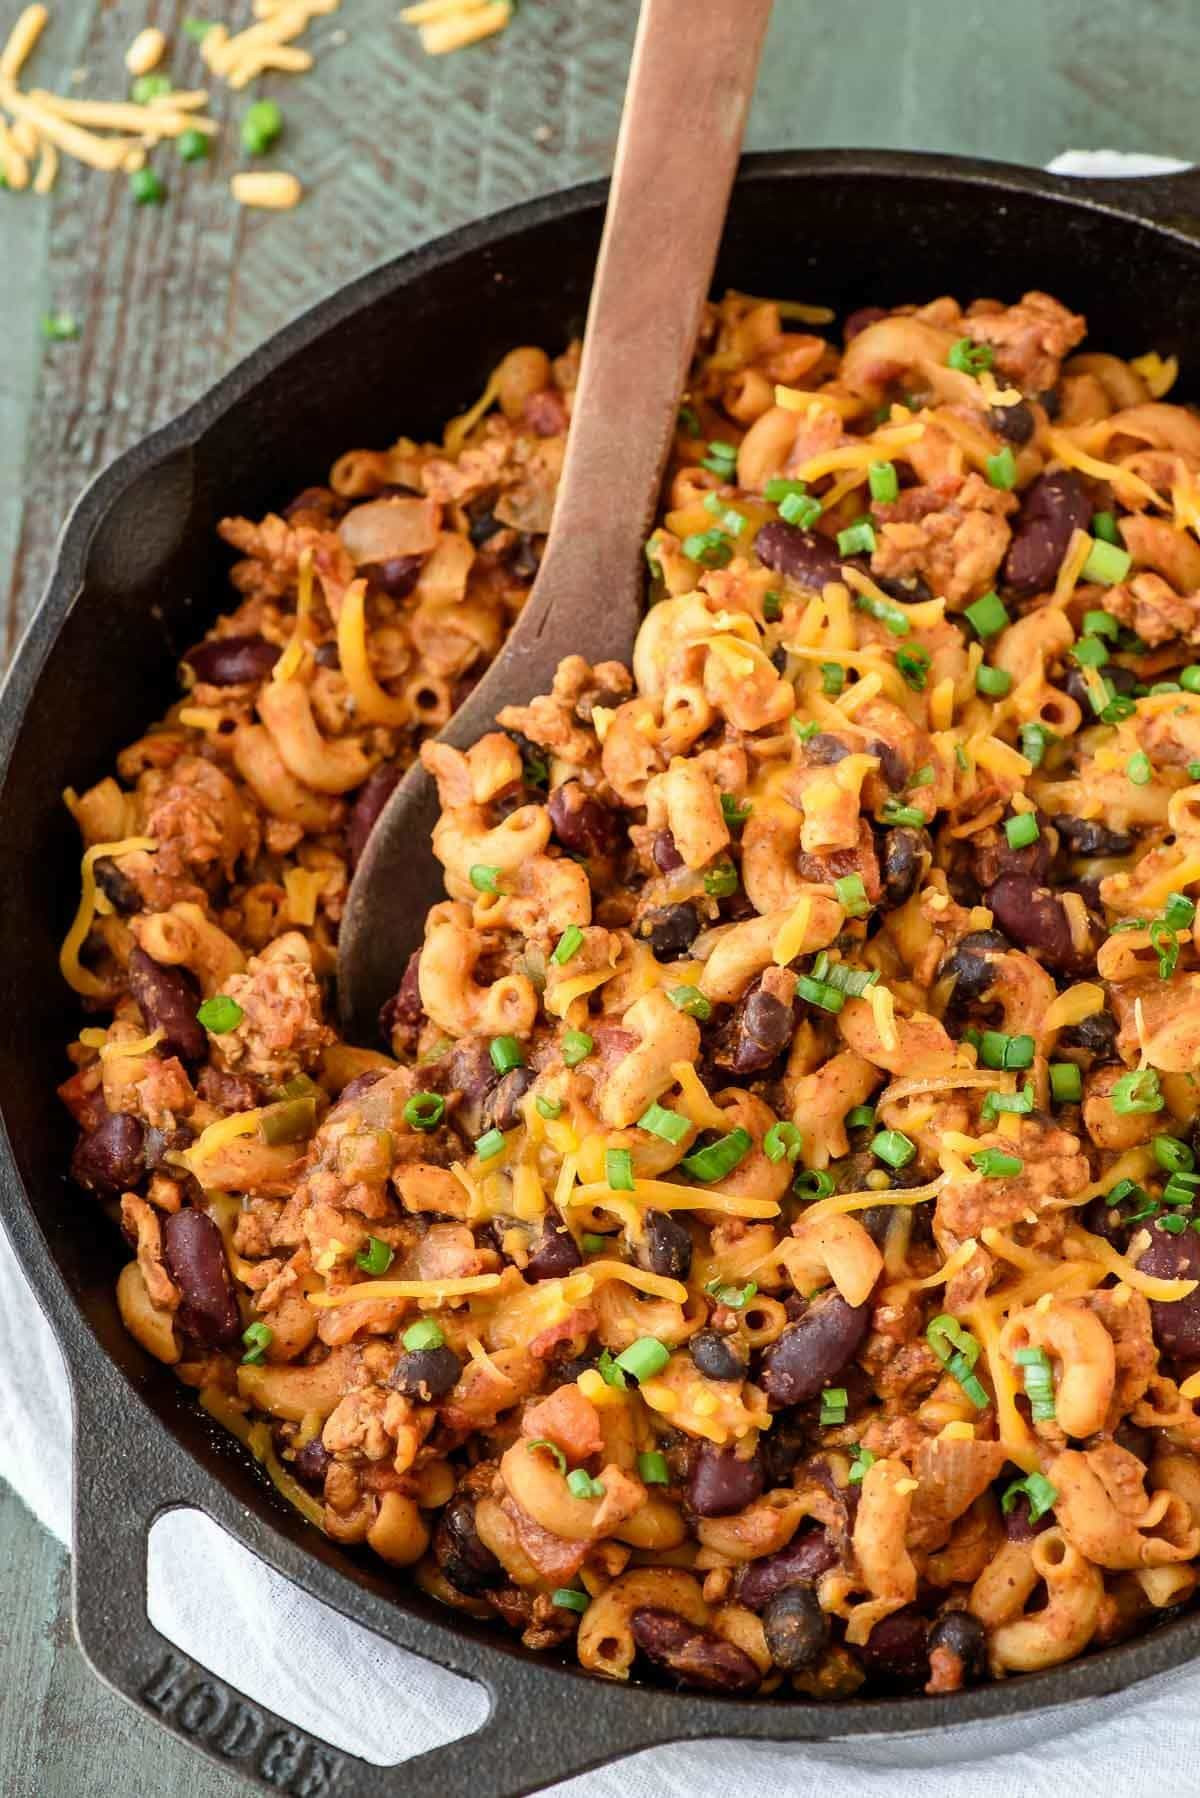 Ground Turkey Mac And Cheese
 An easy delicious recipe for chili mac and cheese with